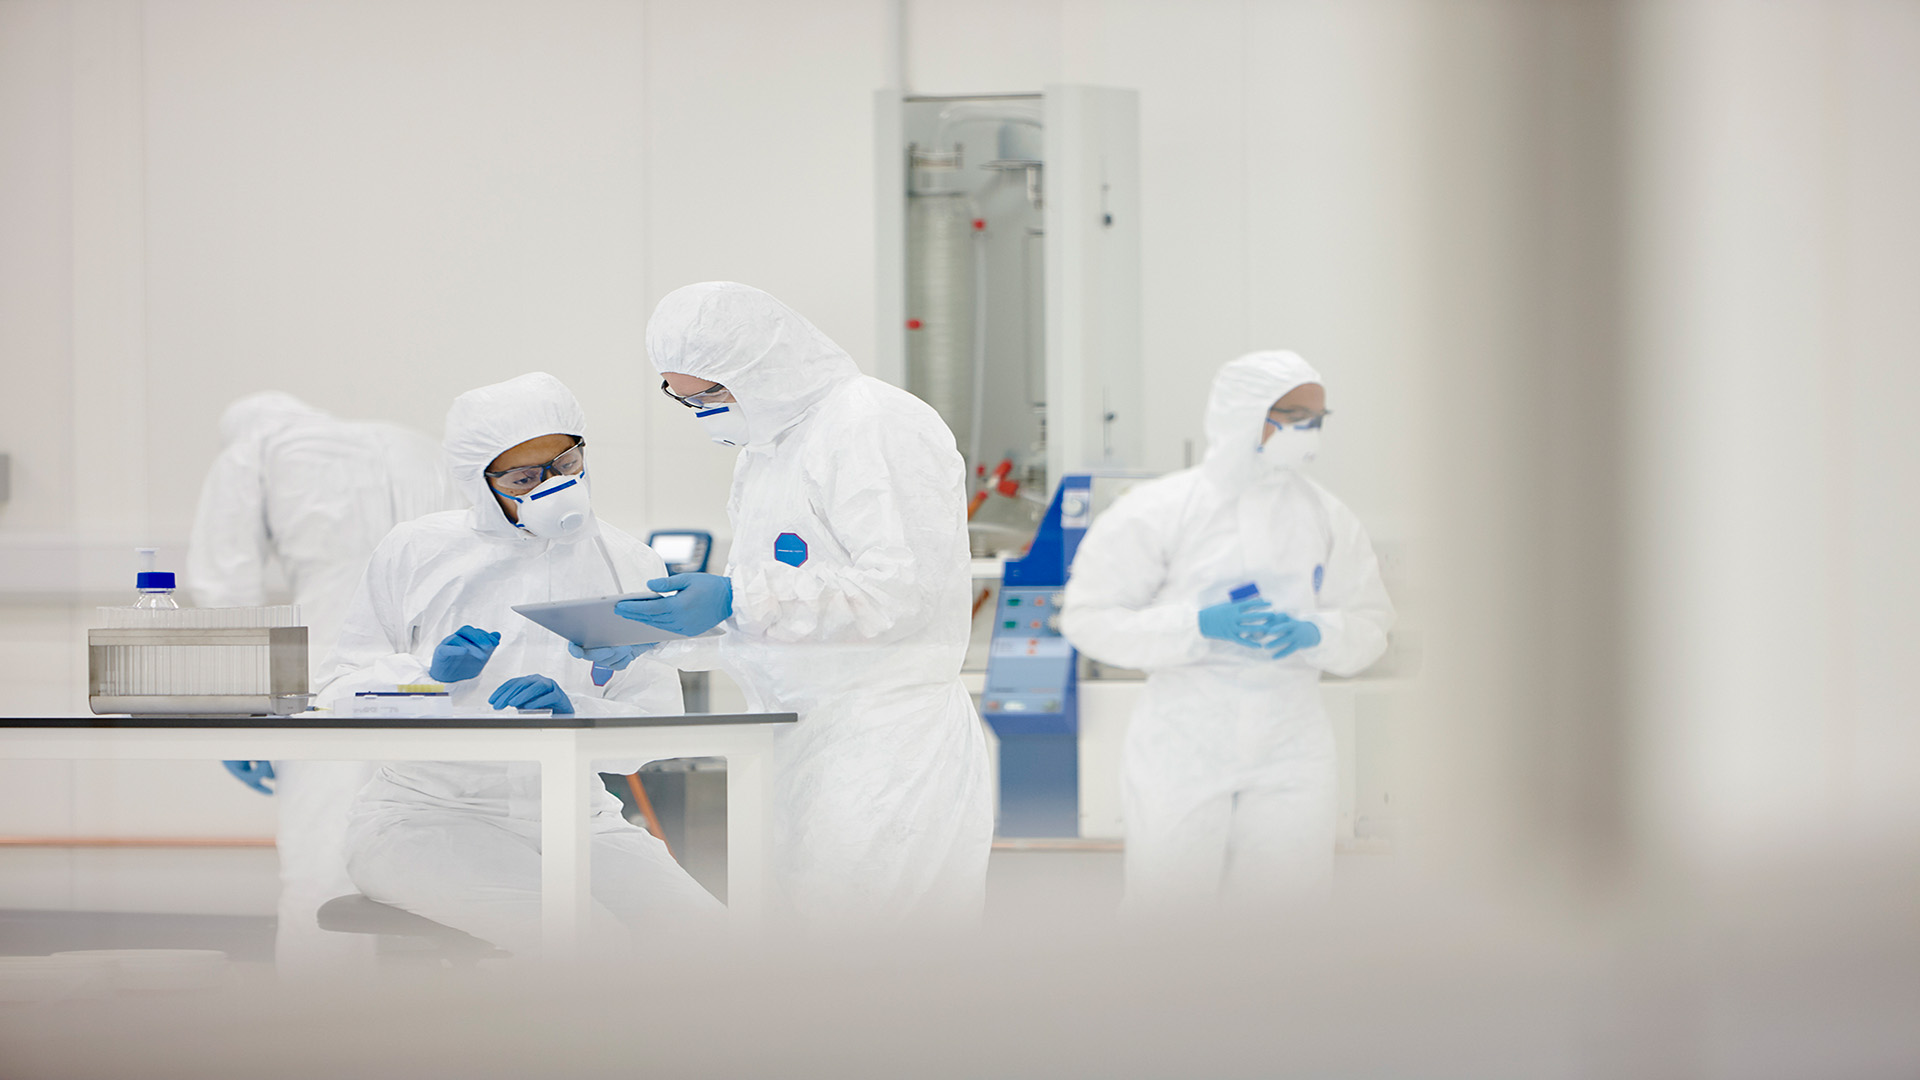 A Brief History of the Cleanroom